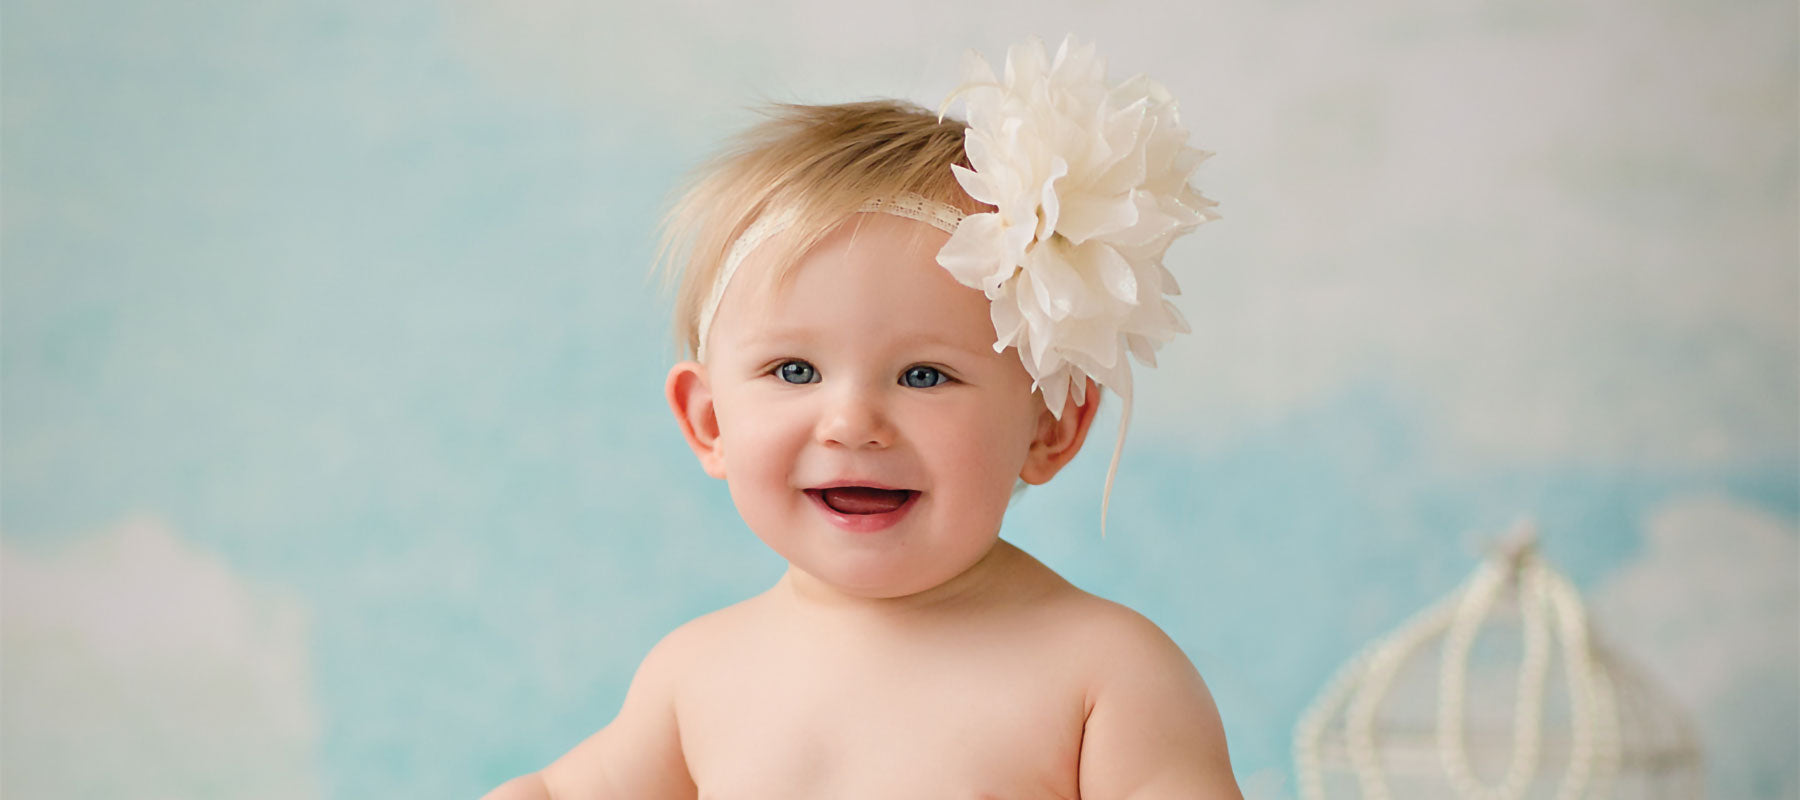 Baby and Children Backdrops - High-Quality Photography Backgrounds for Delightful Portraits.